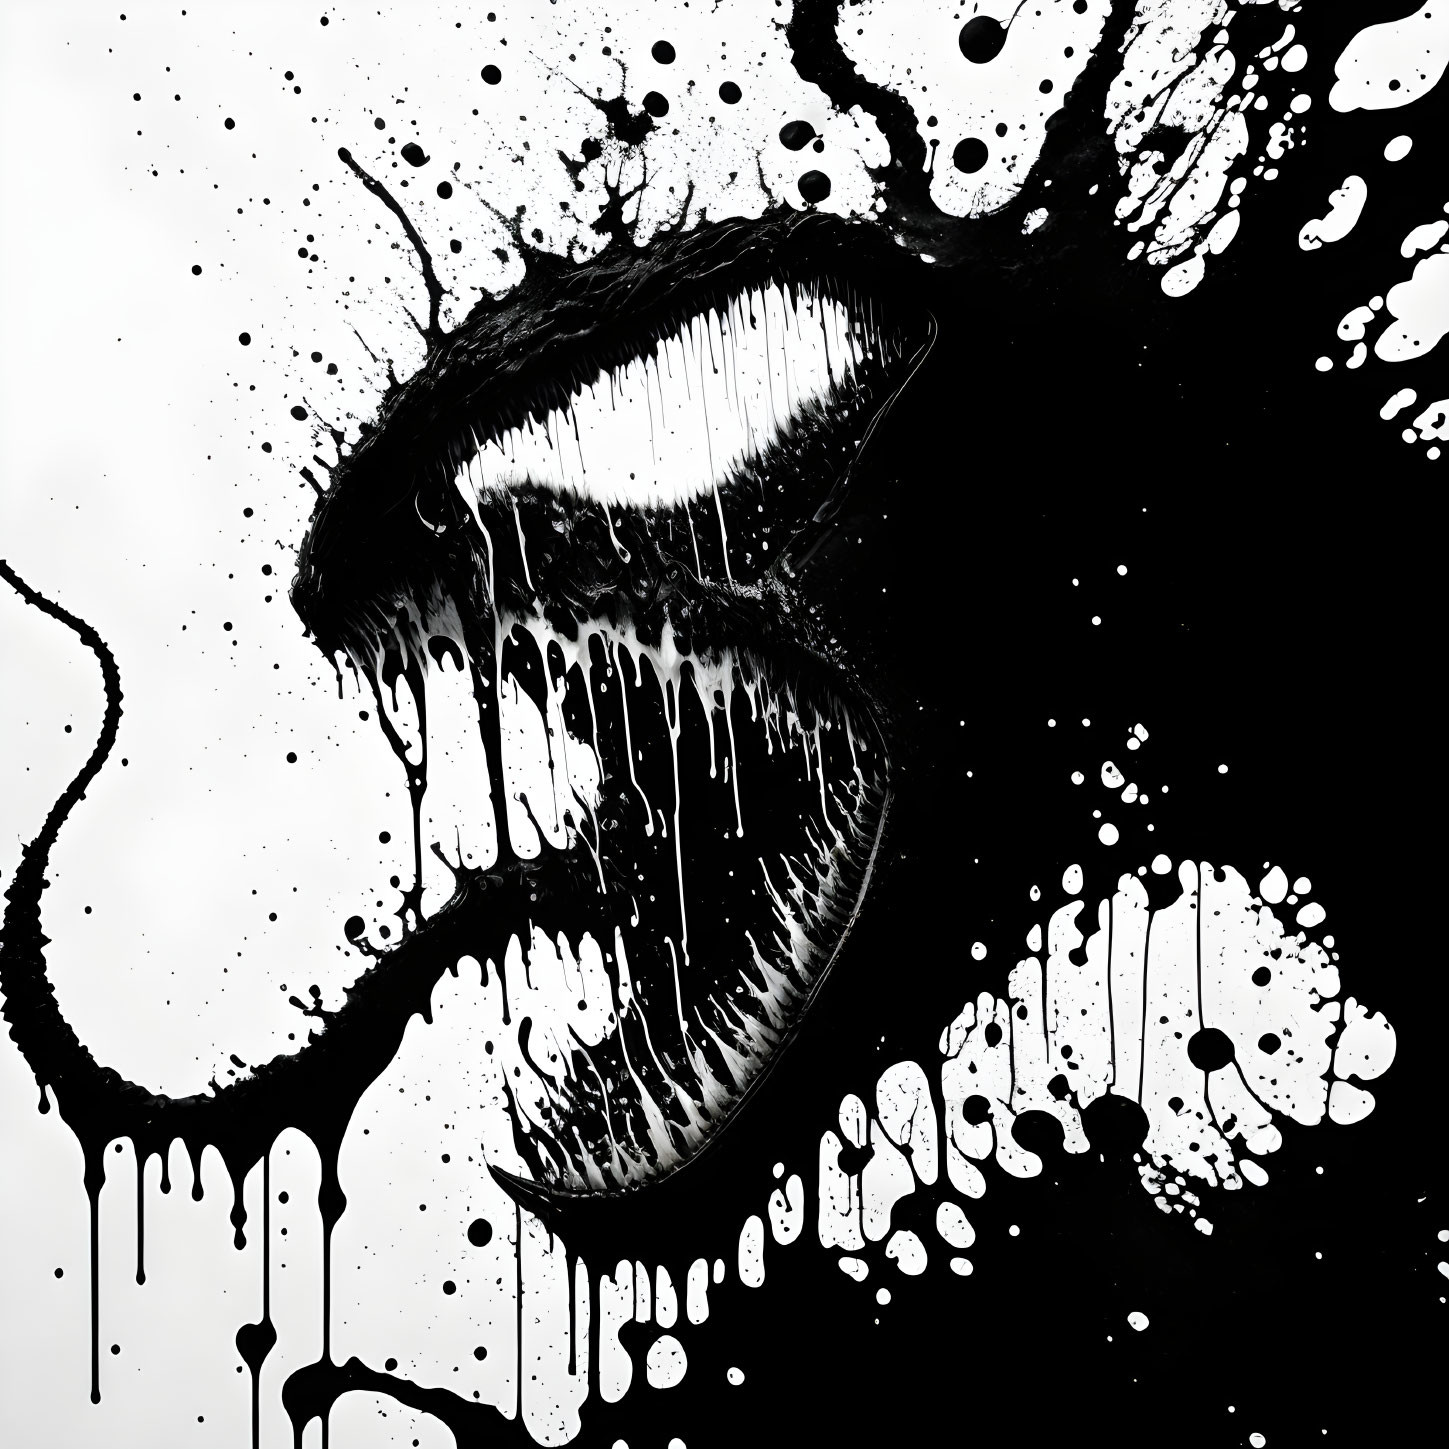 Monochrome stylized mouth with sharp teeth and sinister grin in splattered ink